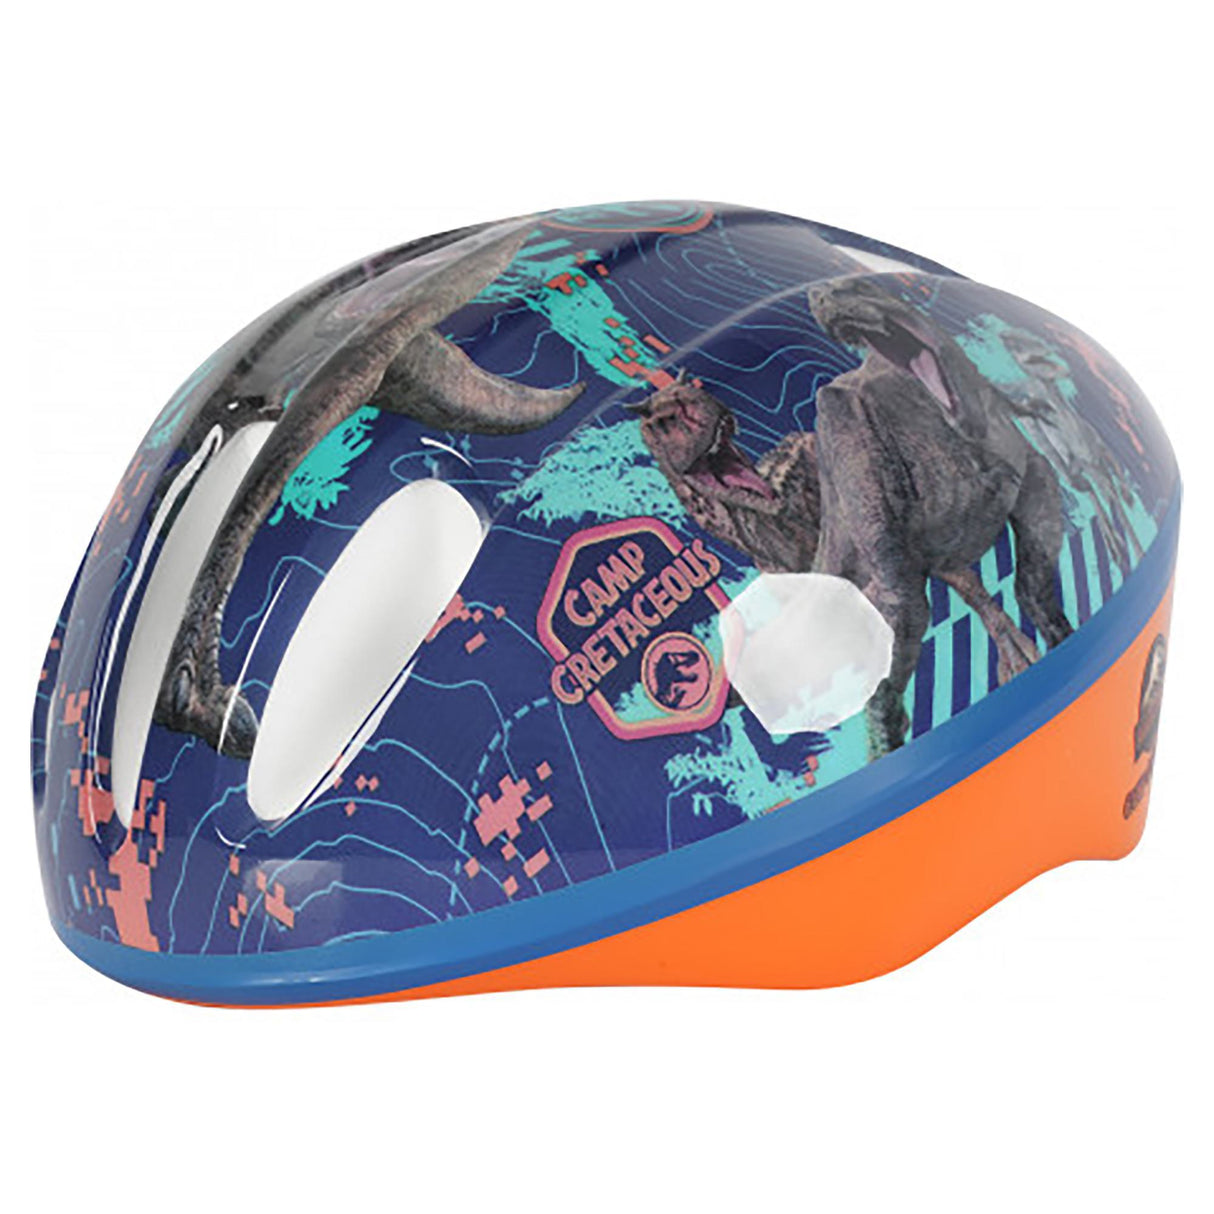 Jurassic World Camp Cretaceous Child Bicycle Safety Helmet